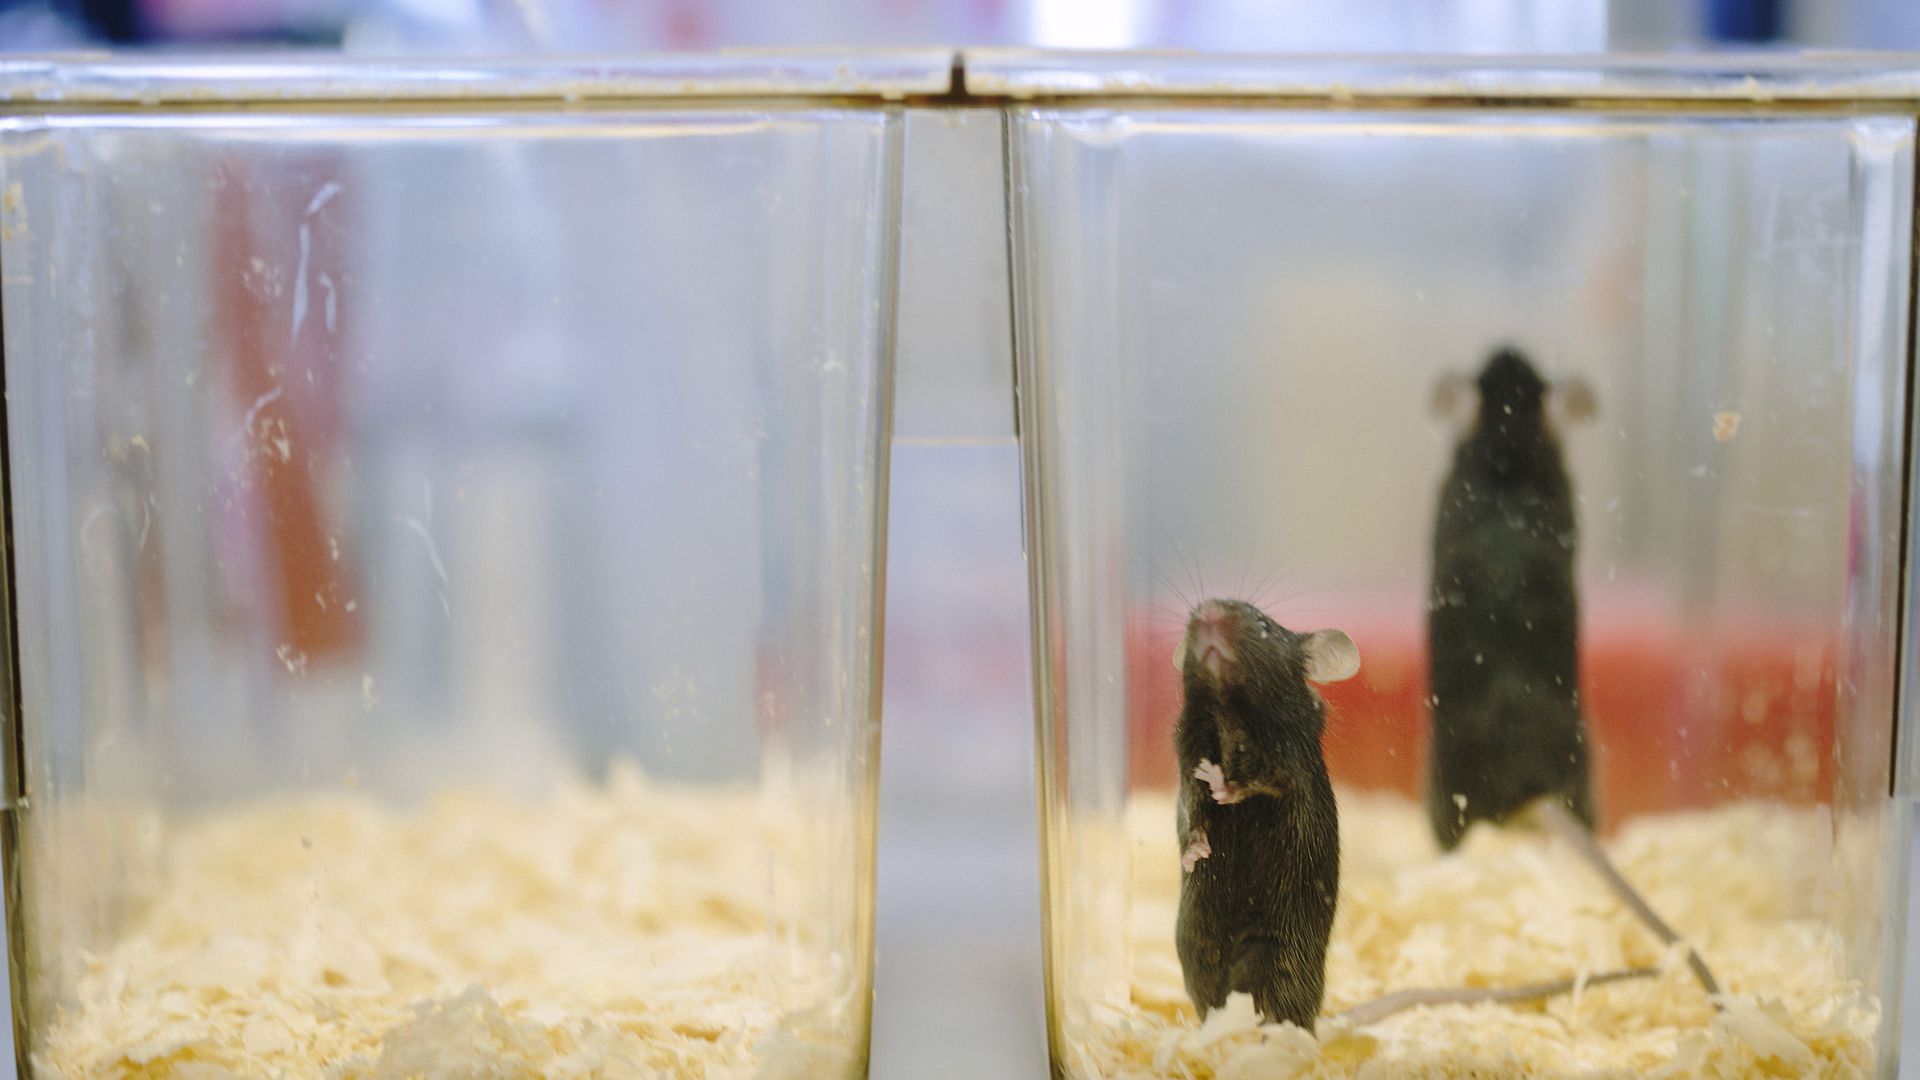 In this image, two mice stand in a clear plastic container with hay on the bottom.